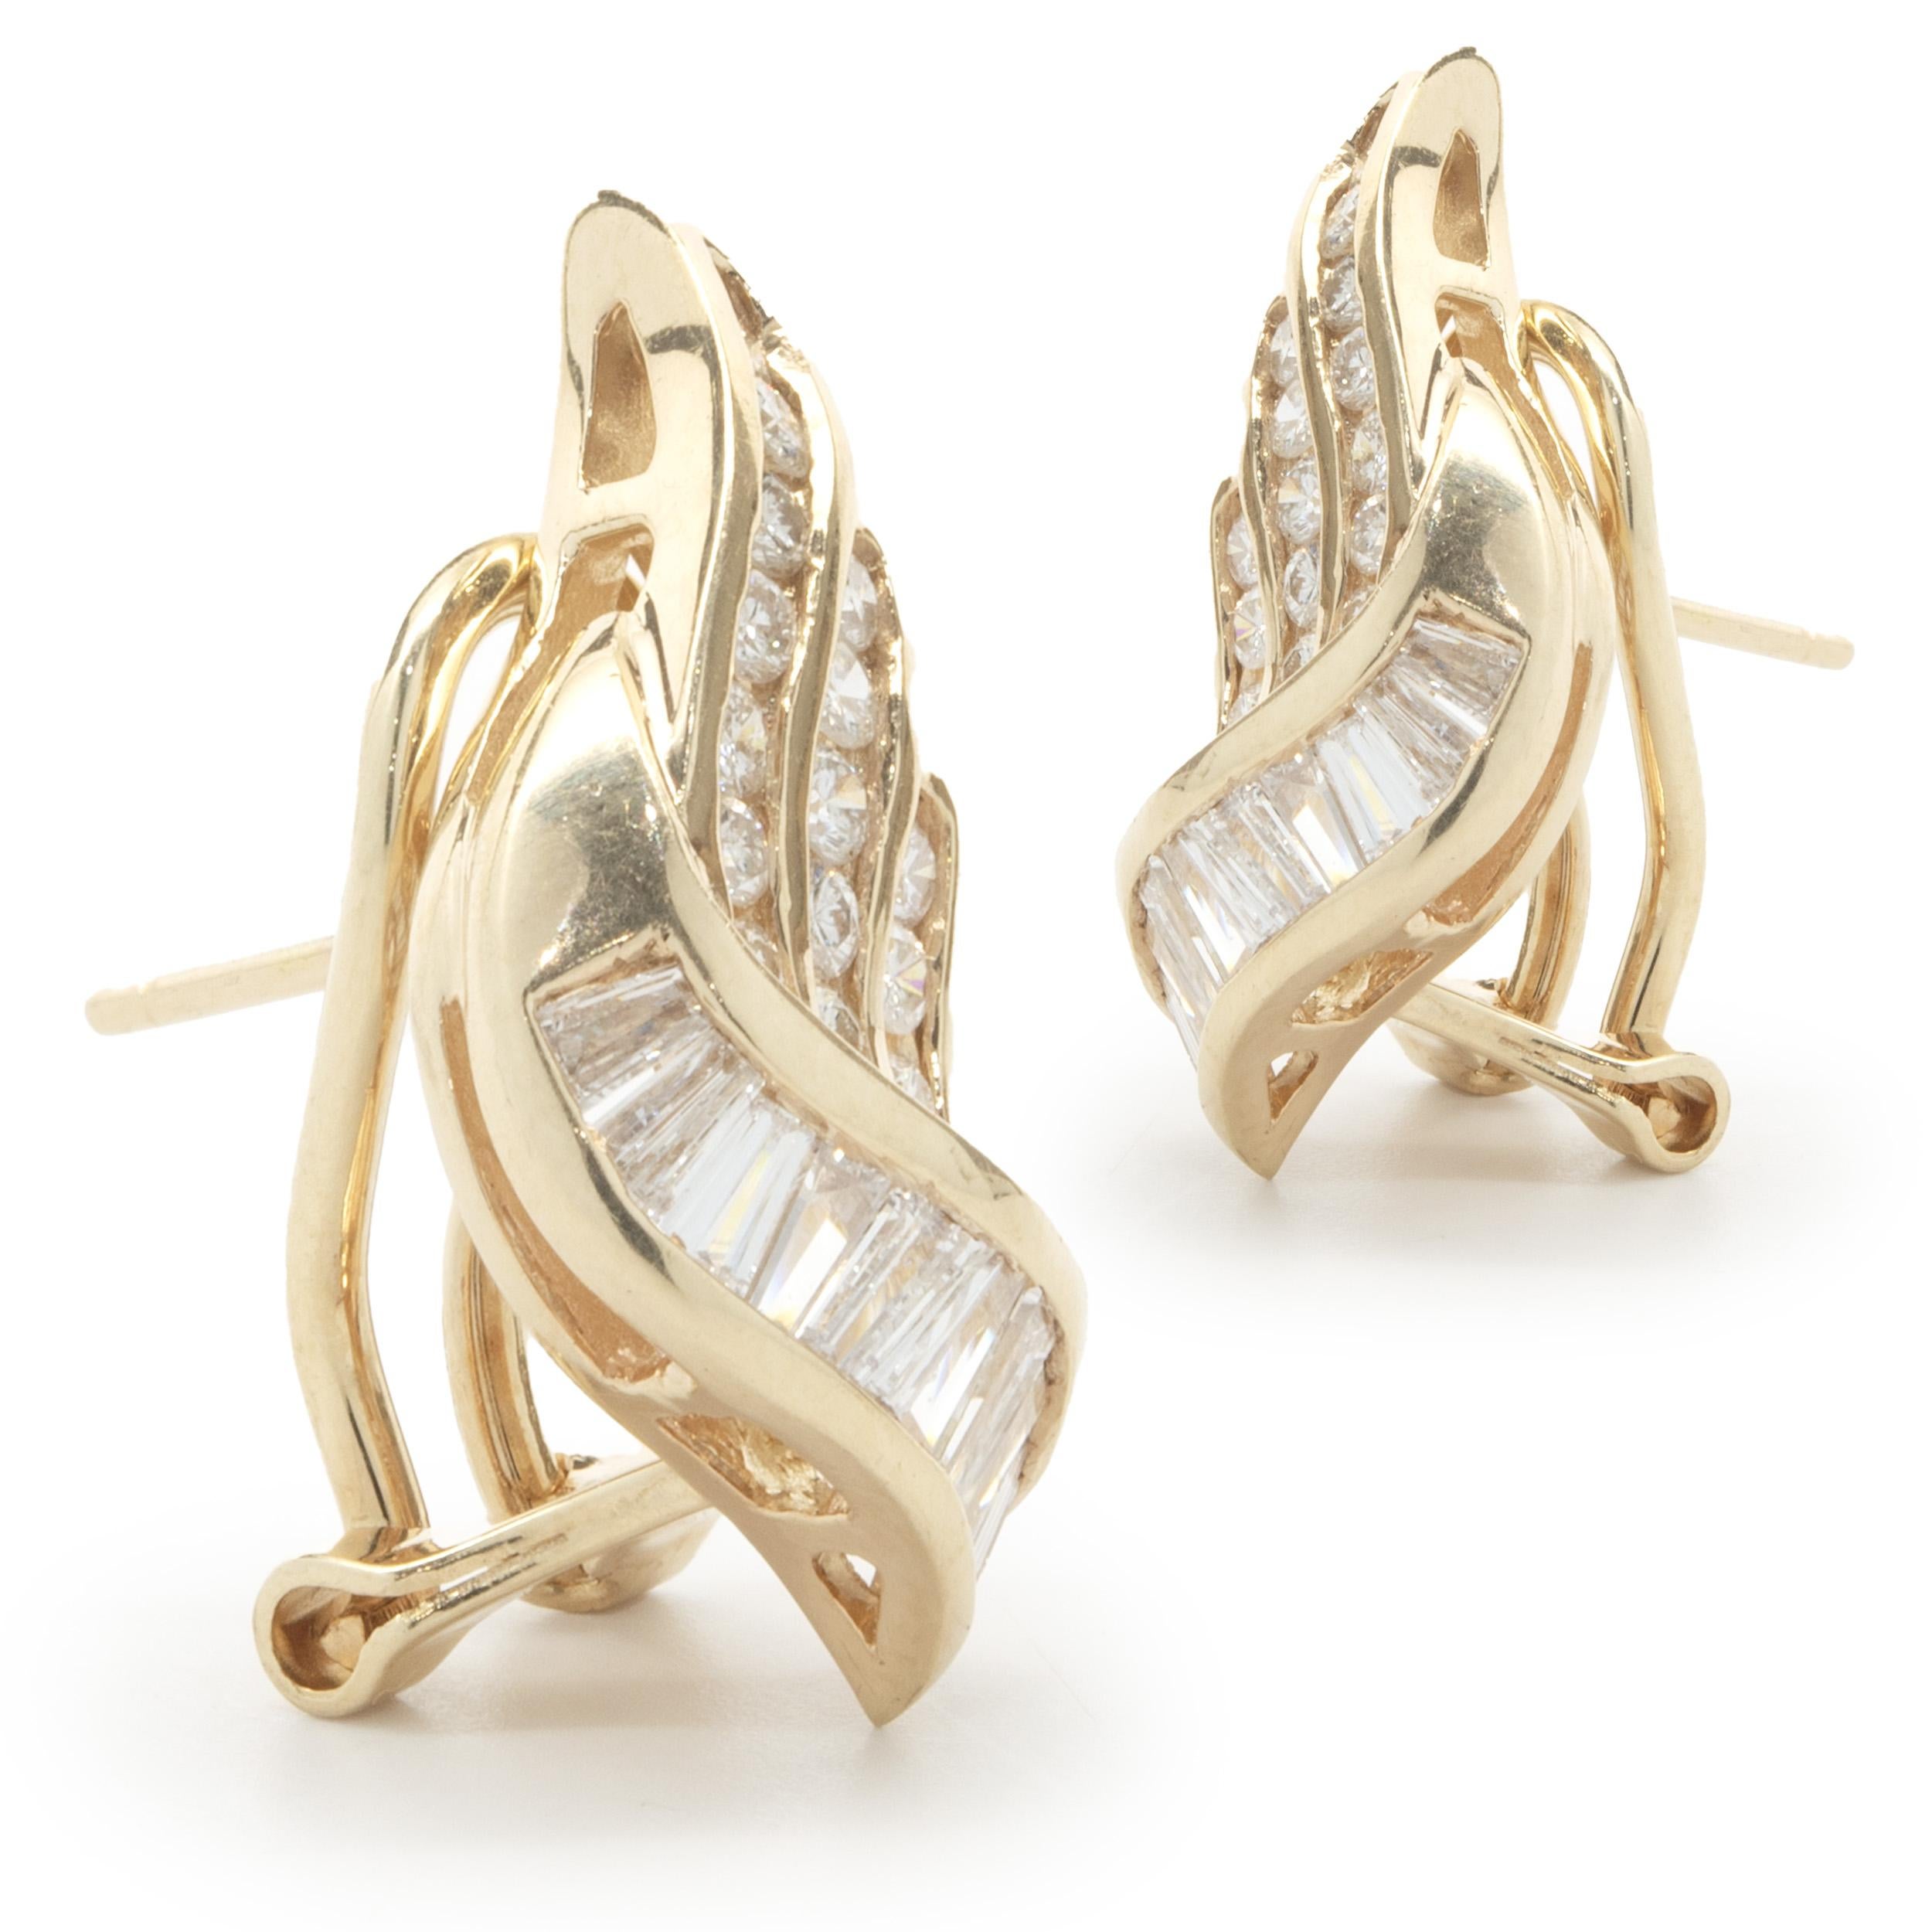 Designer: custom design
Material: 14K yellow gold
Diamonds: 50 round and baguette cut = 1.00cttw
Color: G
Clarity: SI1
Dimensions: earrings measure 22mm wide
Weight: 6.42 grams